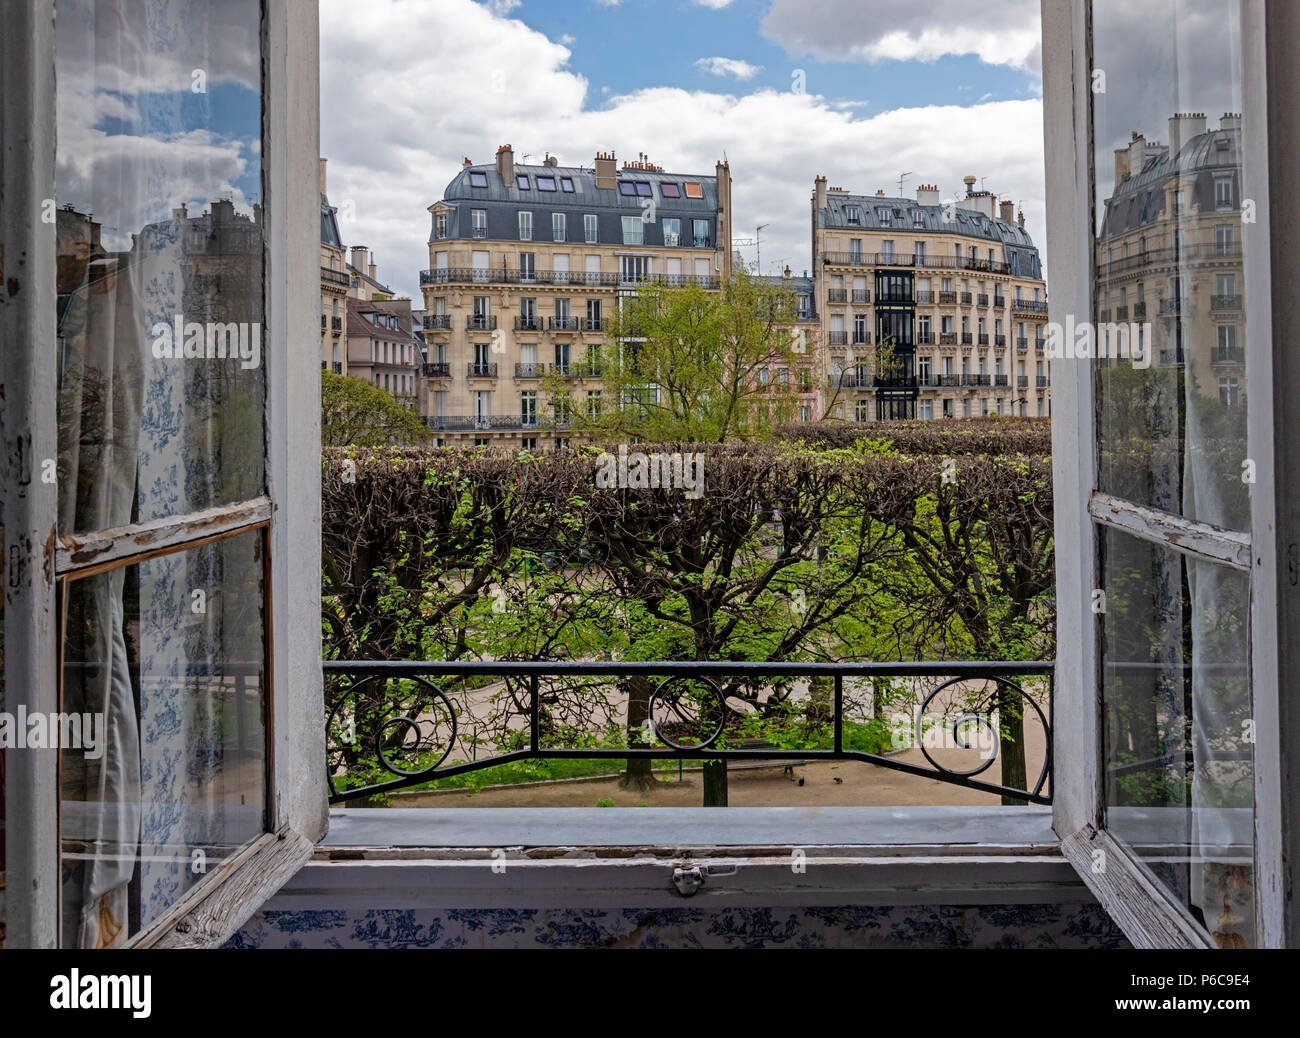 View from a French window opening into the room overlooking buildings with Second Empire architecture. Stock Photo